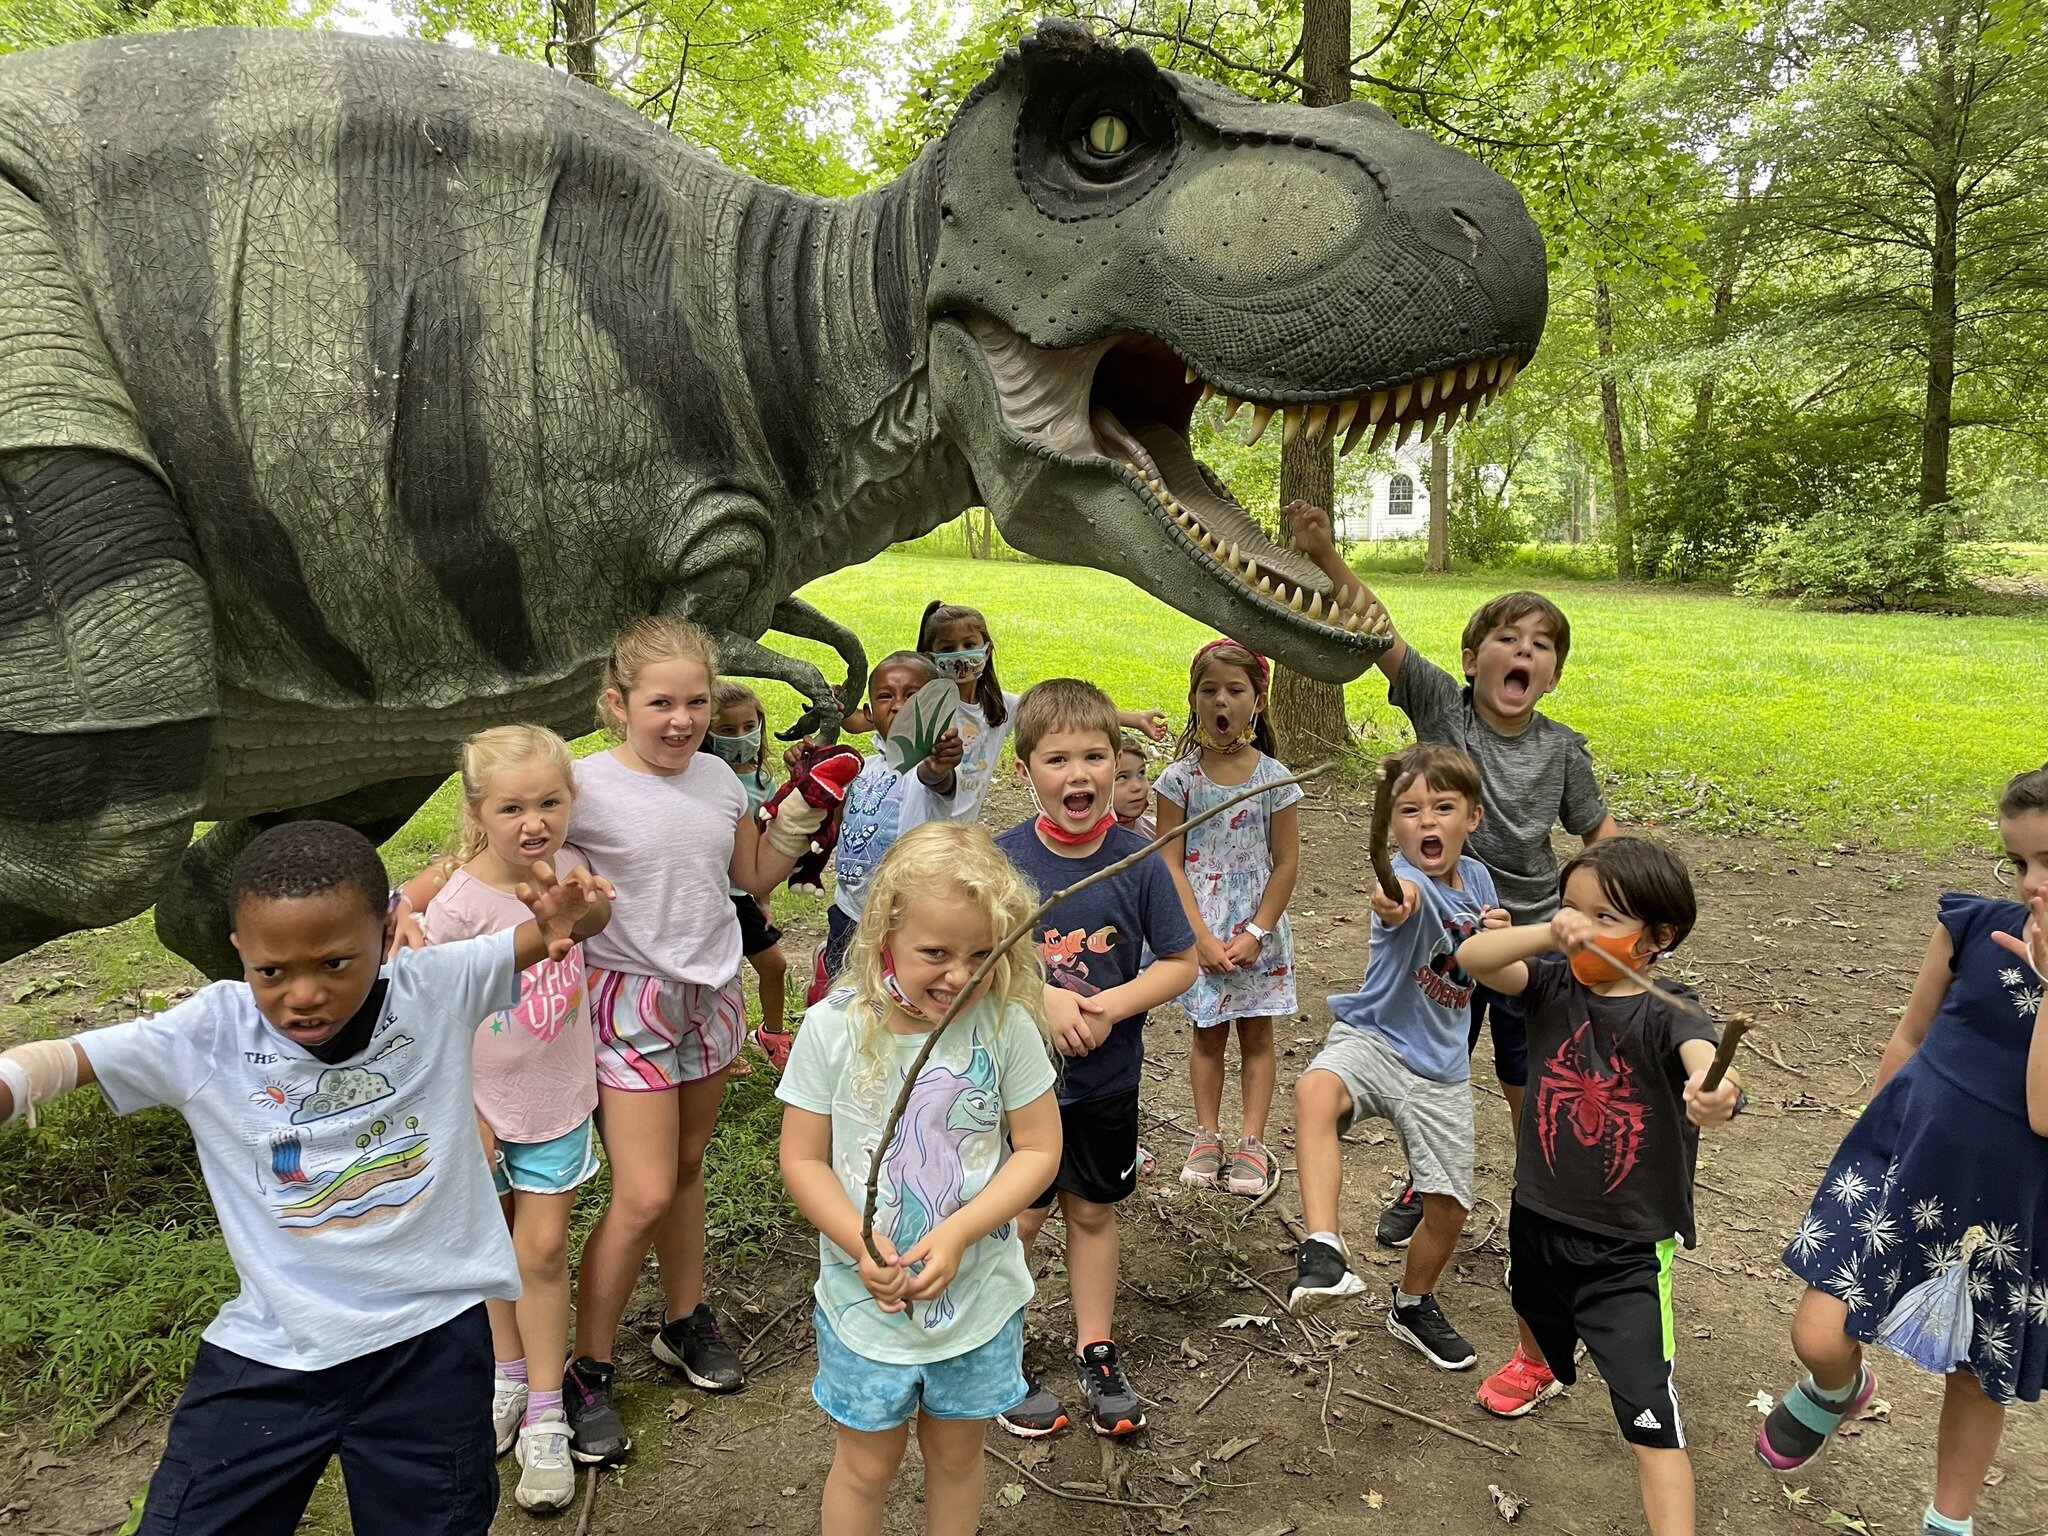 If anyone is still looking to sign up their preschool- 3rd grader, I am running my &ldquo;Spanish Adventures&ldquo; camps which includes lots of scavenger hunts, crafts, games, stories and drama at Sanford and Tatnall. Let me know if you have any que